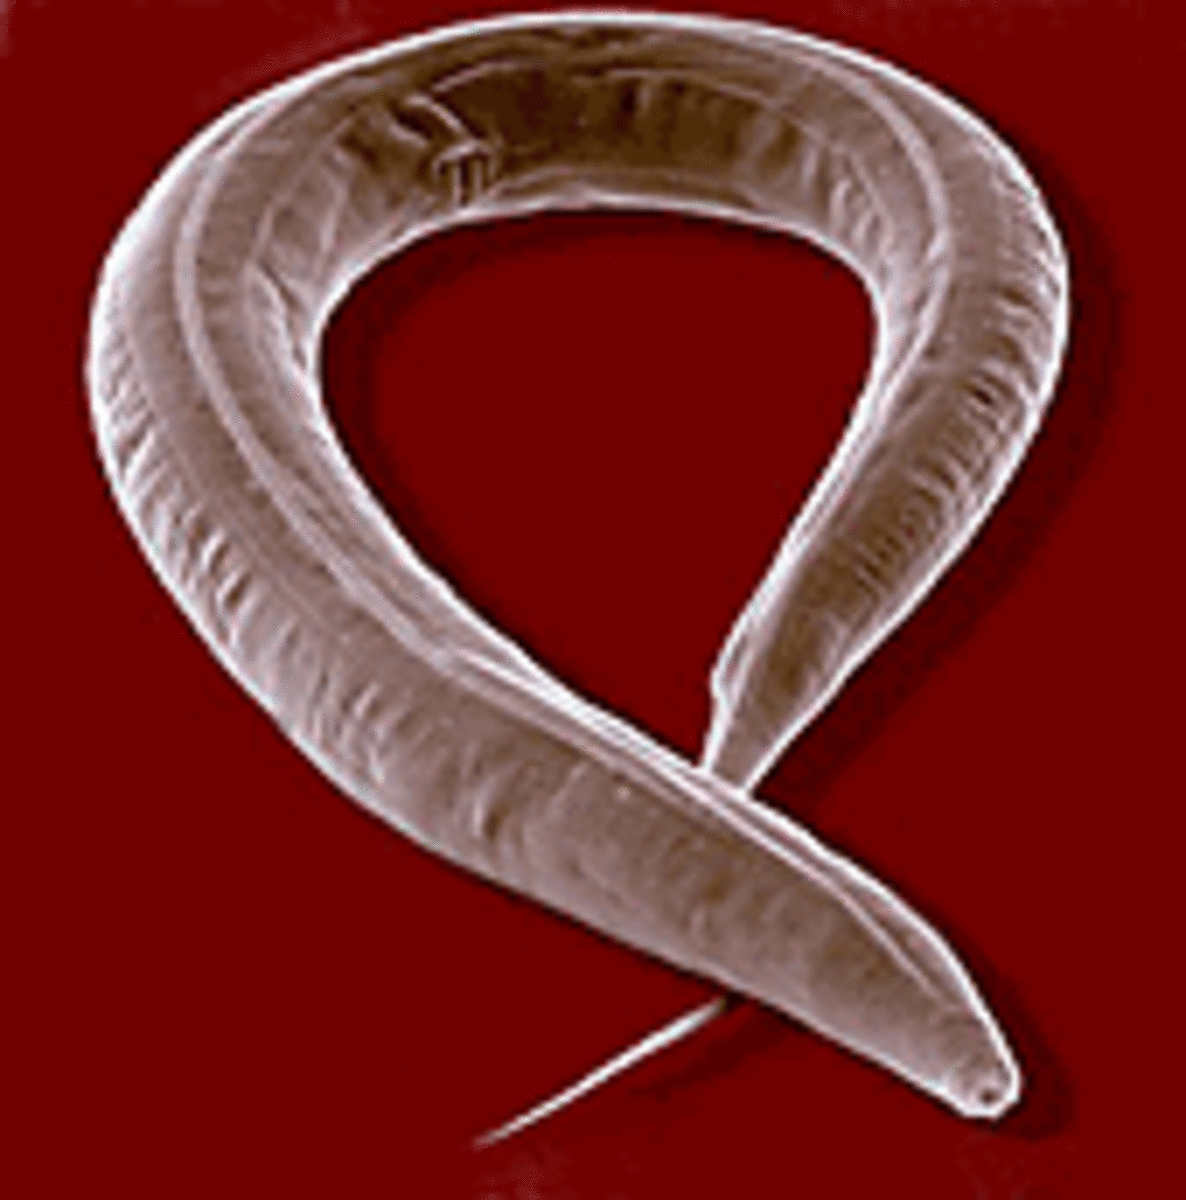 Roundworms are not earthworms either!